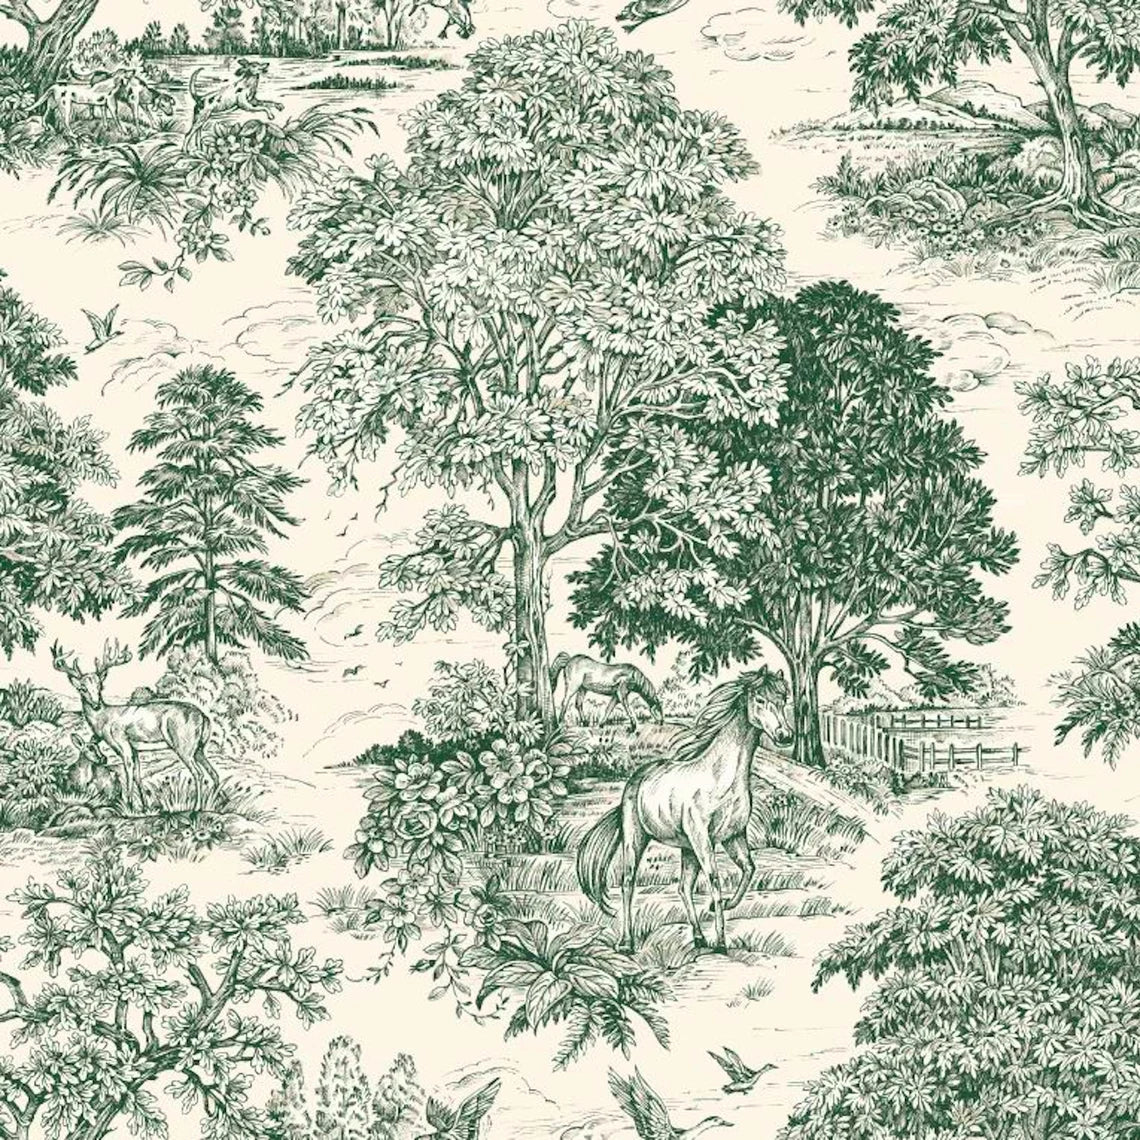 Bed Scarf in Yellowstone Classic Green Country Toile- Horses, Deer, Dogs- Large Scale